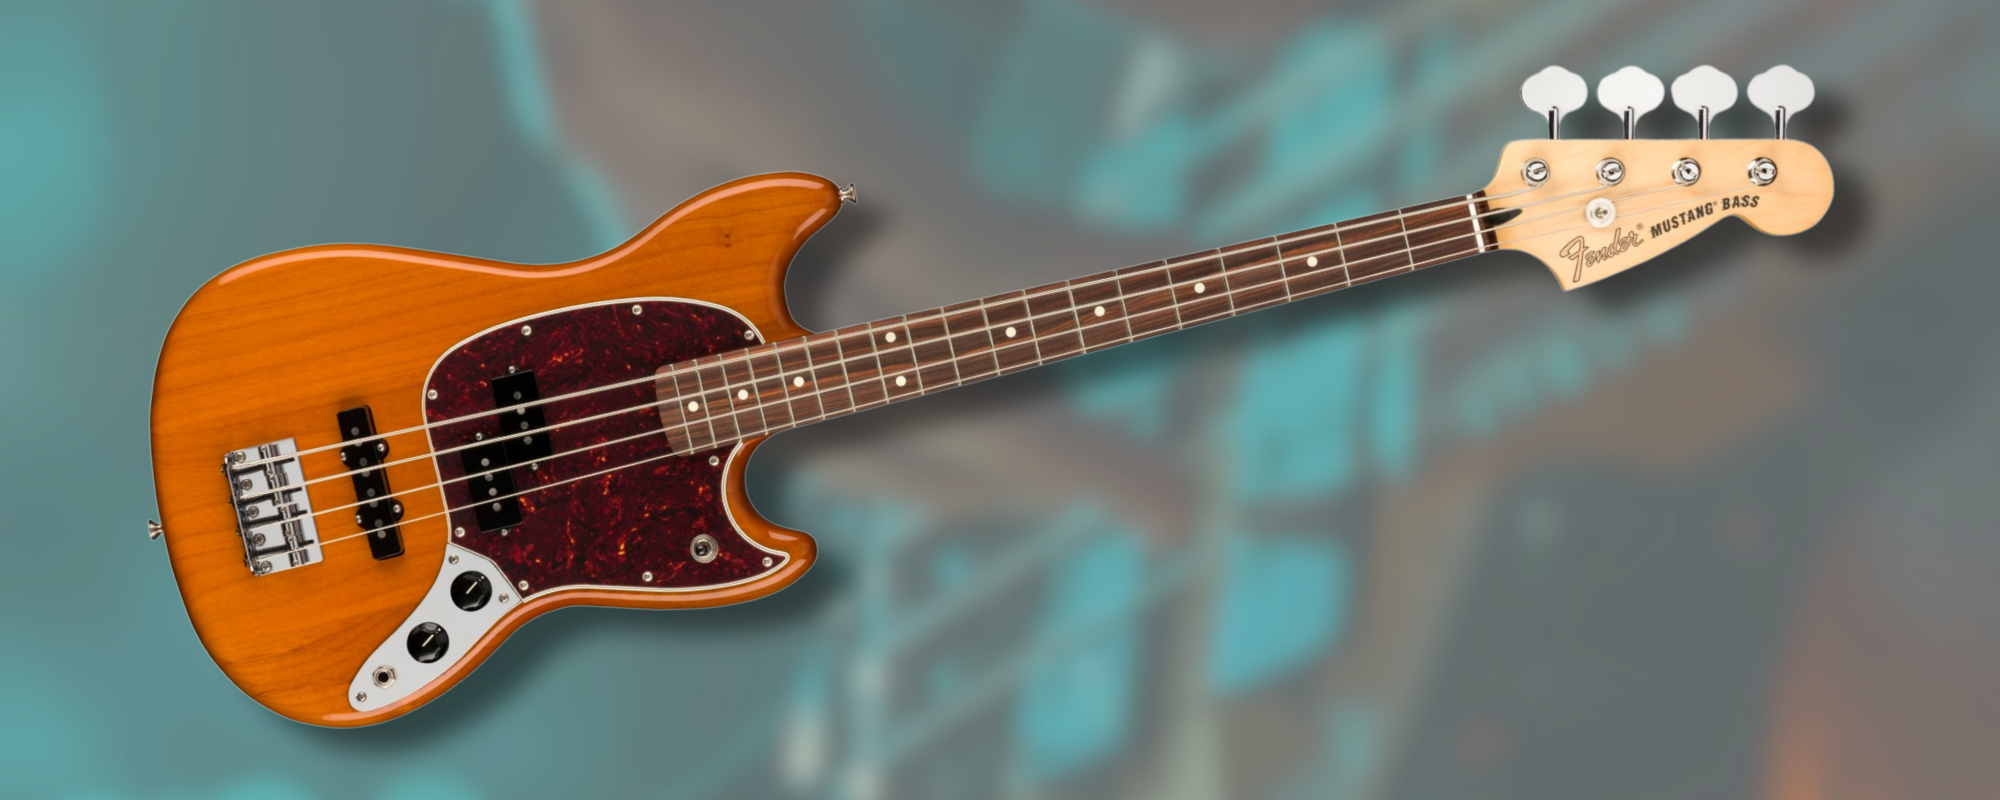 Fender Player Mustang Bass PJ Review: Affordable, Versatile Short-Scale